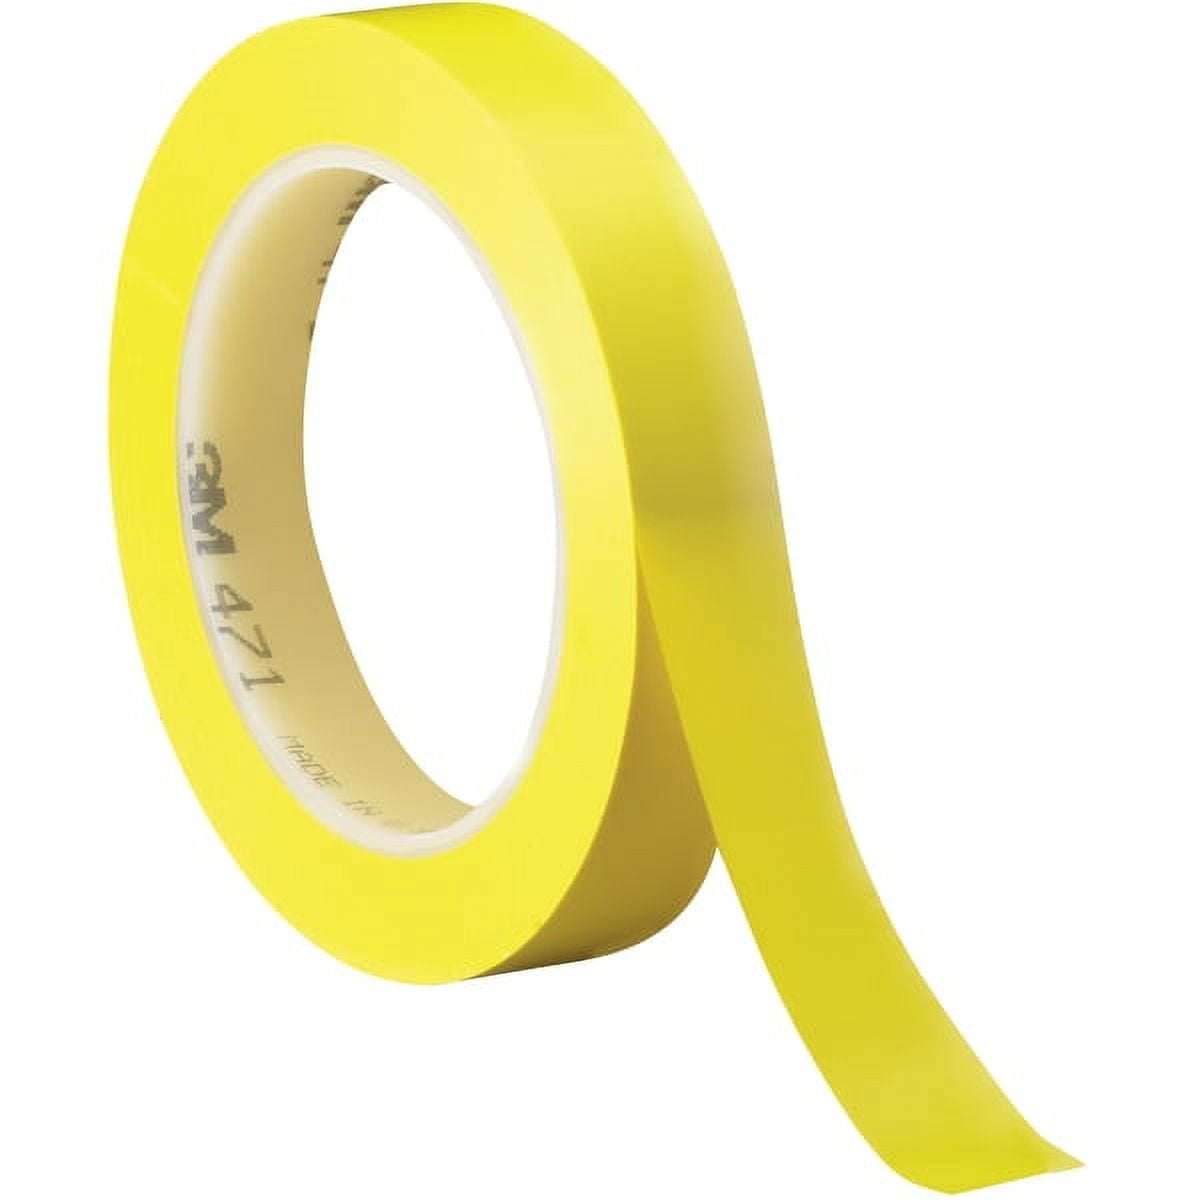 T9644713pky 0.75 In. X 36 Yards Yellow 471 Vinyl Tape, Yellow - Pack Of 3